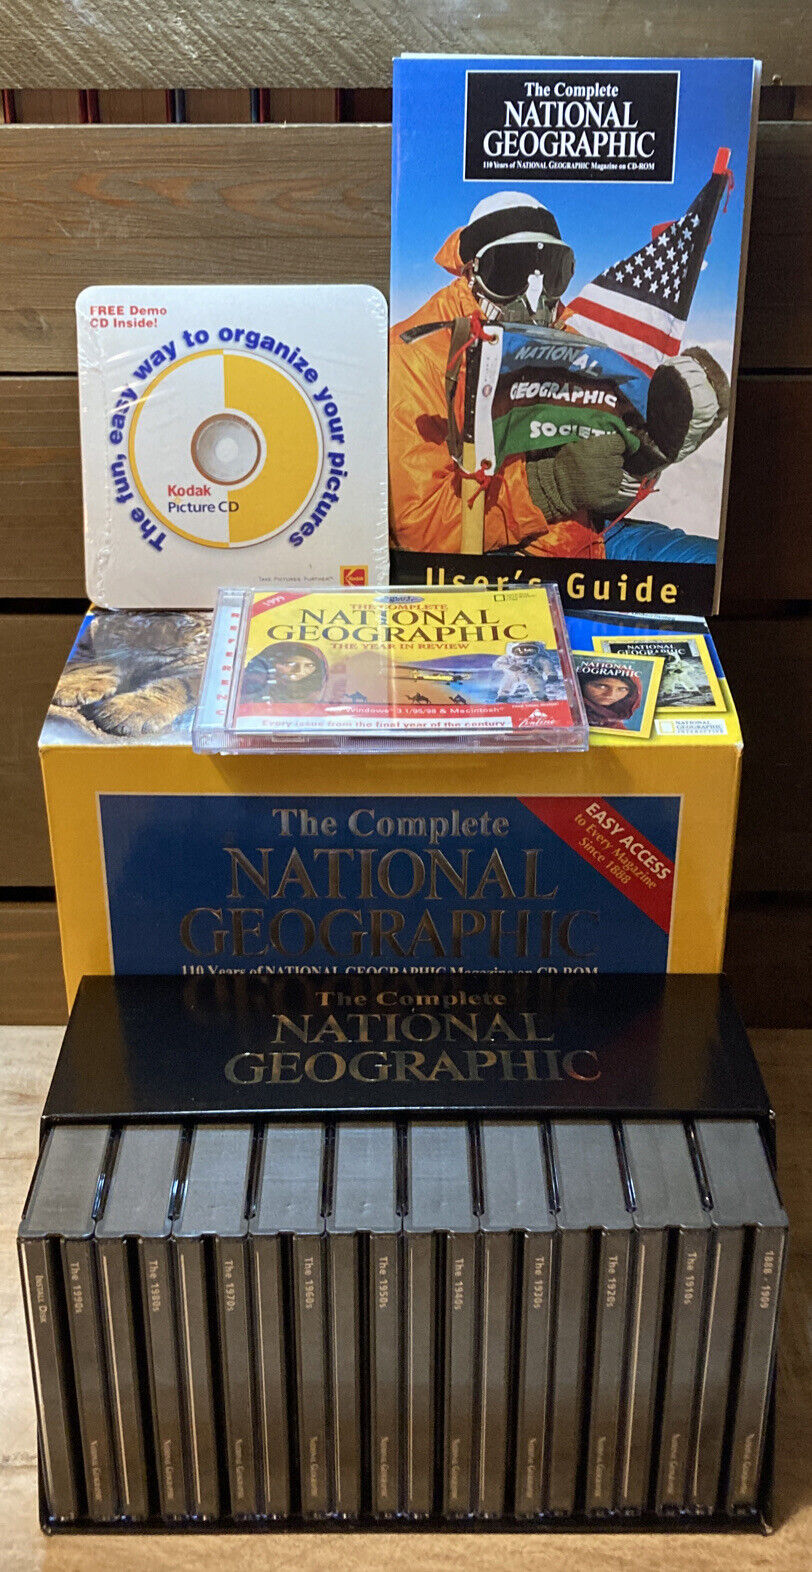 The Complete National Geographic Computer CDs Access every magazine since 1888